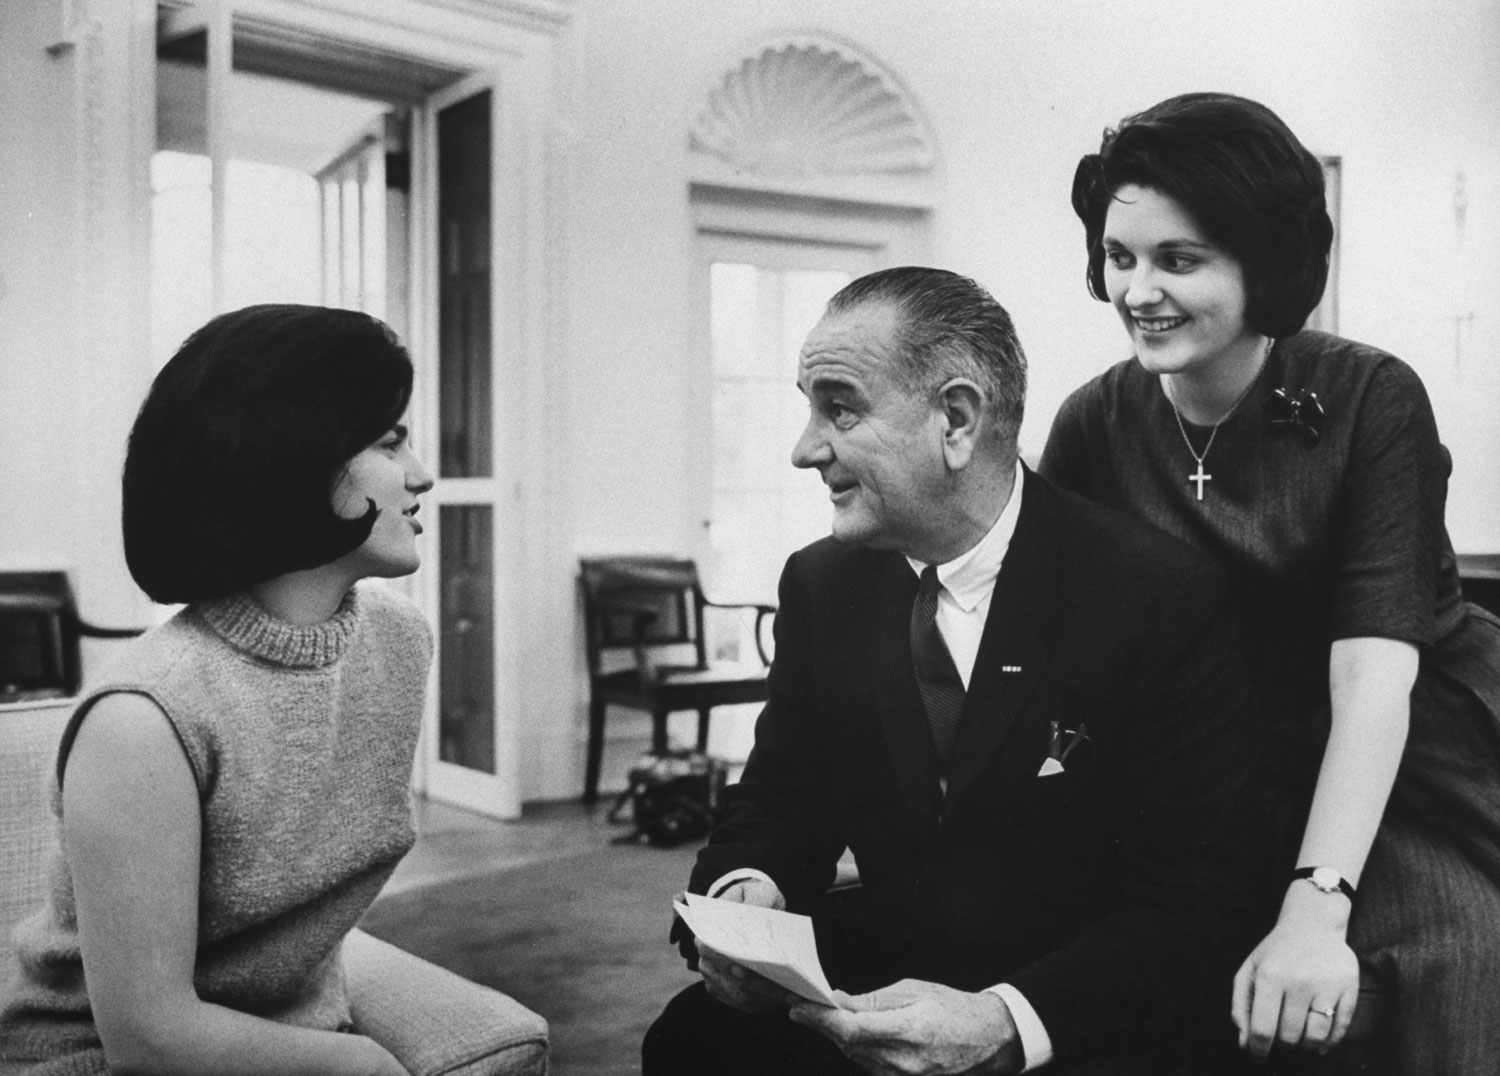 Lyndon Johnson with daughters Lucy and Lynda, 1964.